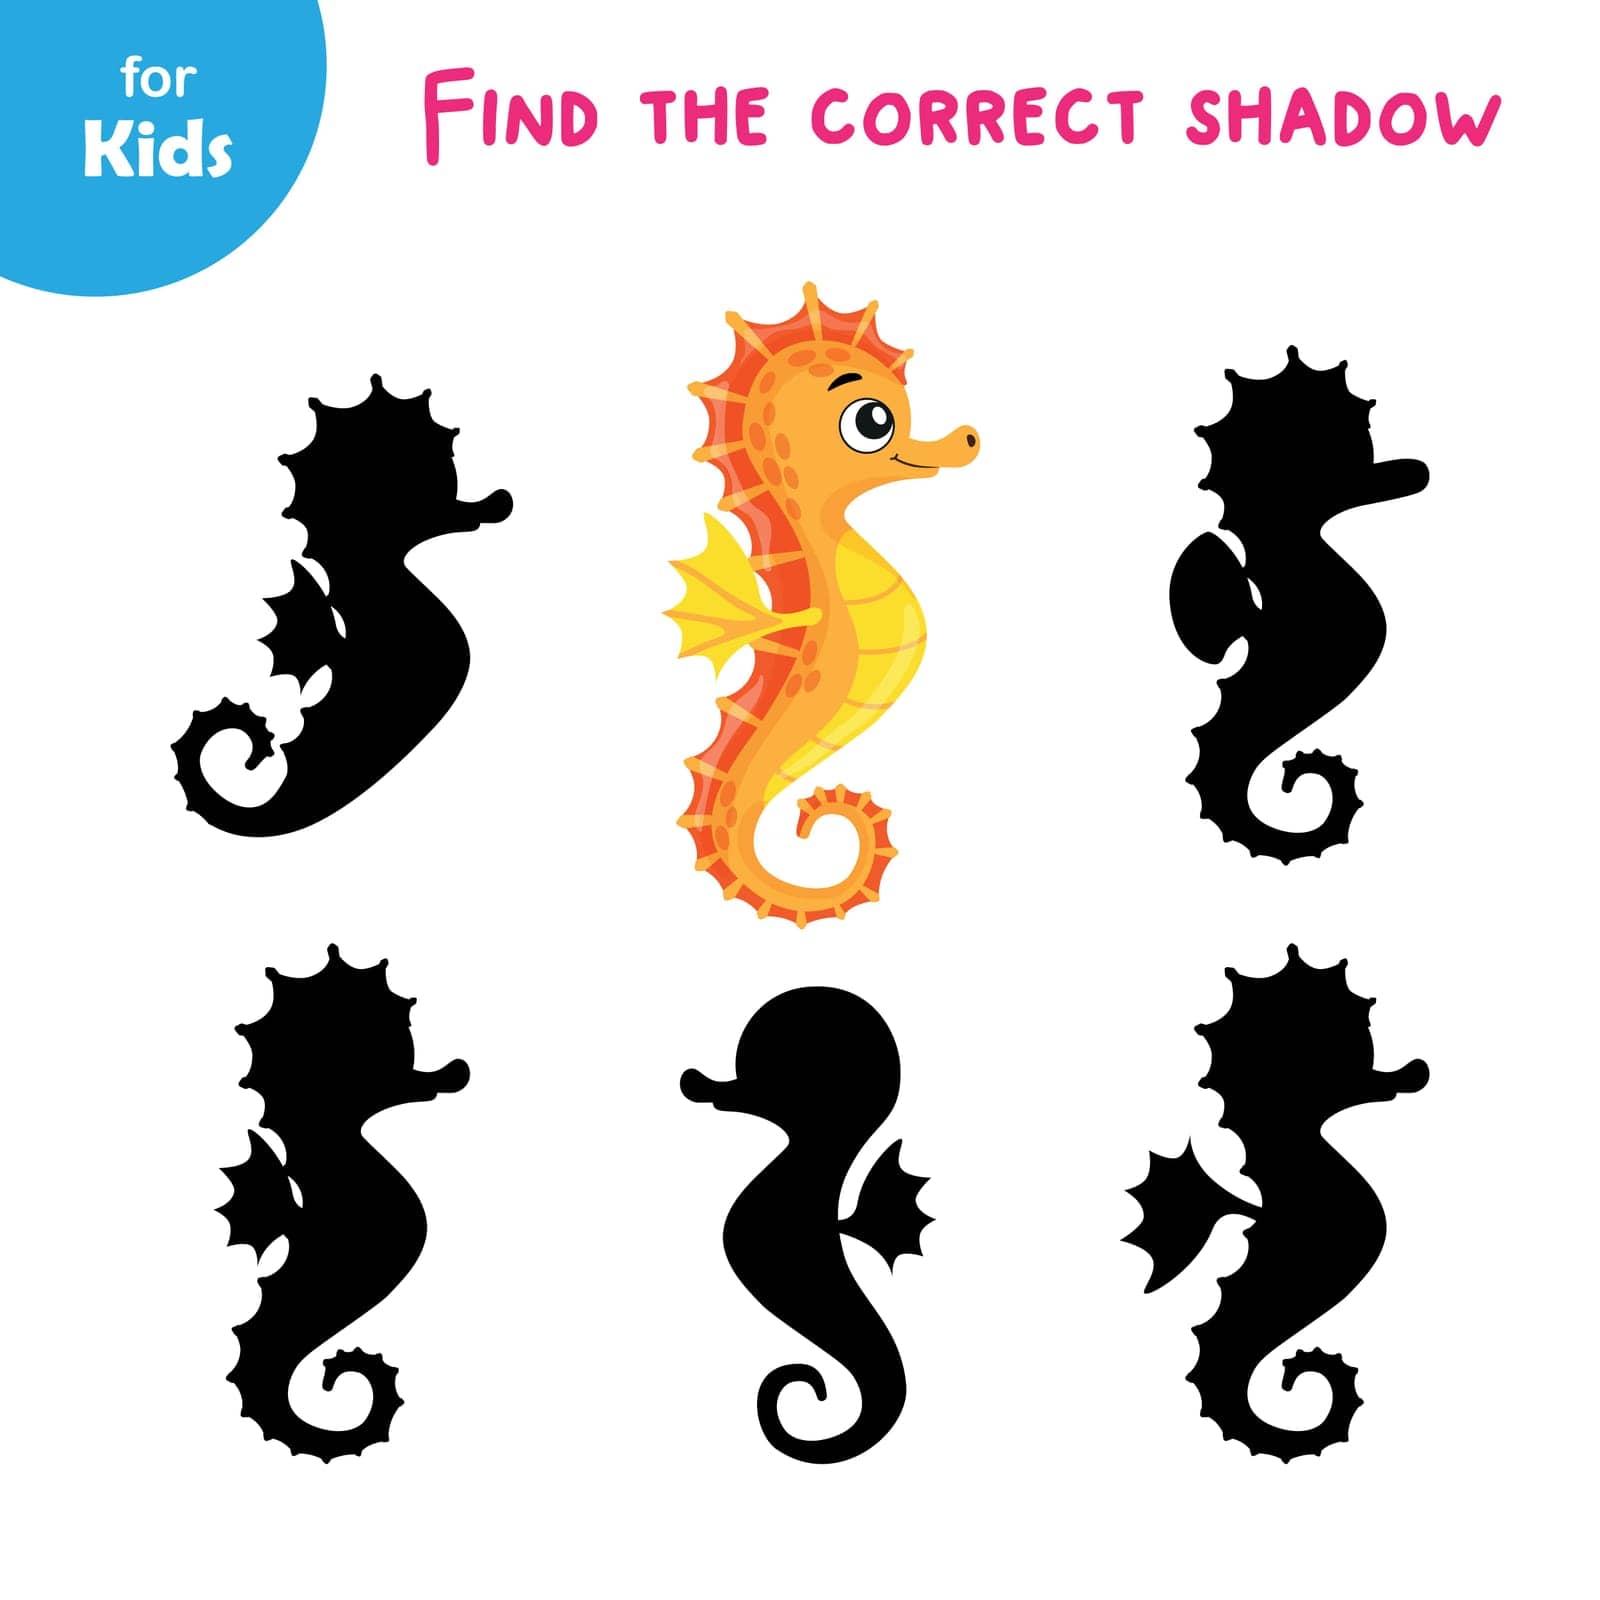 A Series Of Educational Games On The Marine Theme Gather A Shadow For The Seahorse. Introduces Children To Marine Animals. An Interactive, Fun Activity, Helps Kids Improve Their Powers Of Observation